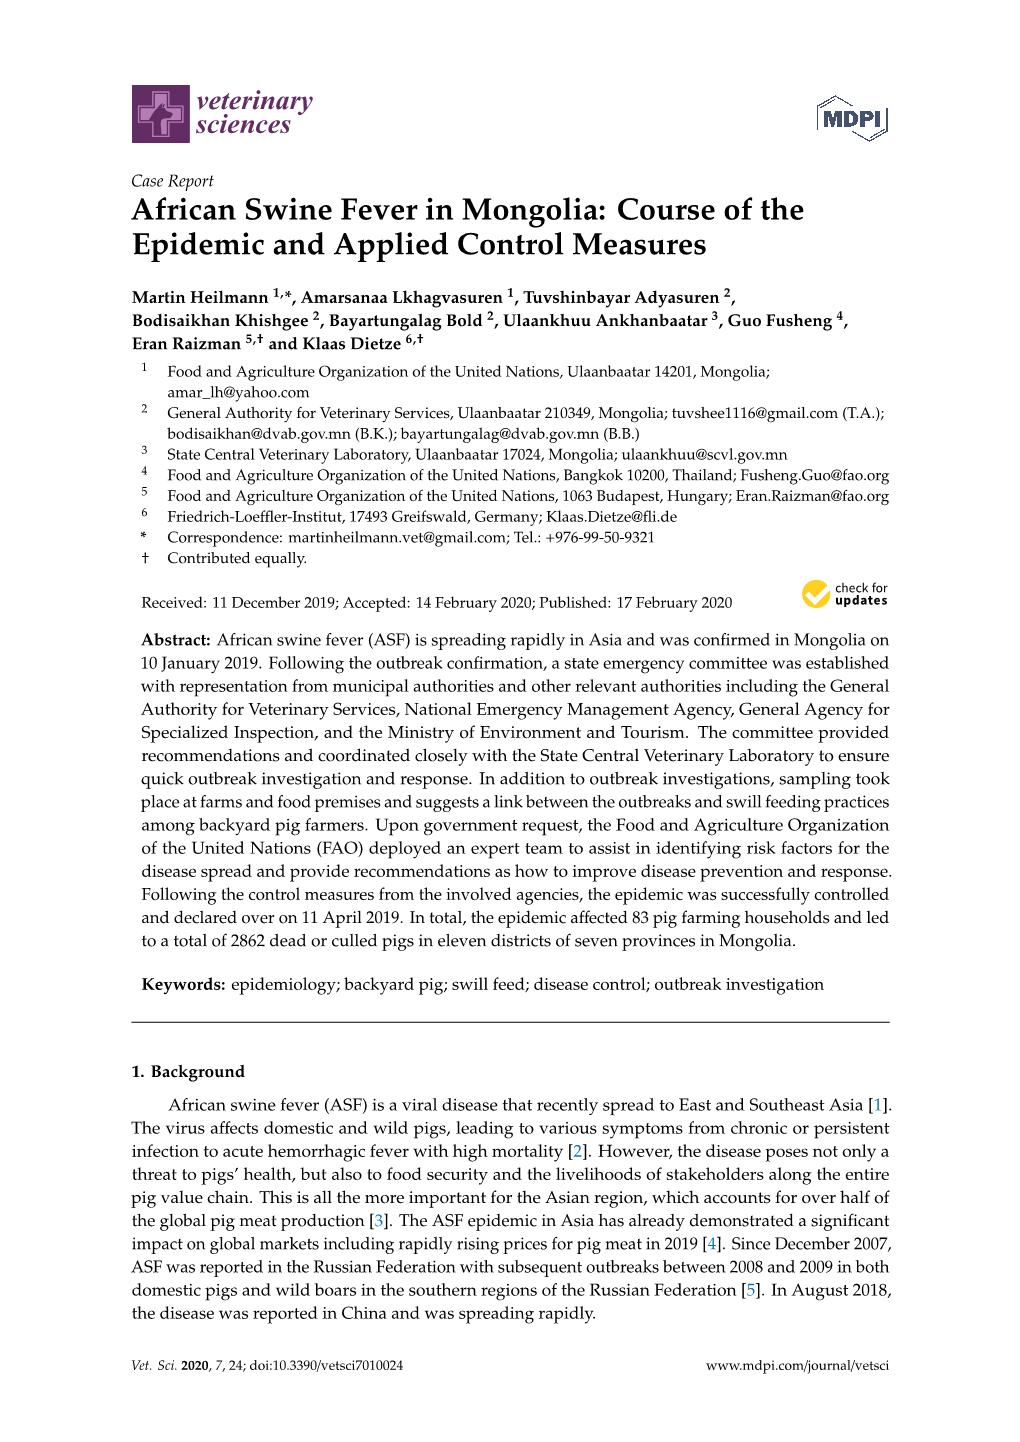 African Swine Fever in Mongolia: Course of the Epidemic and Applied Control Measures